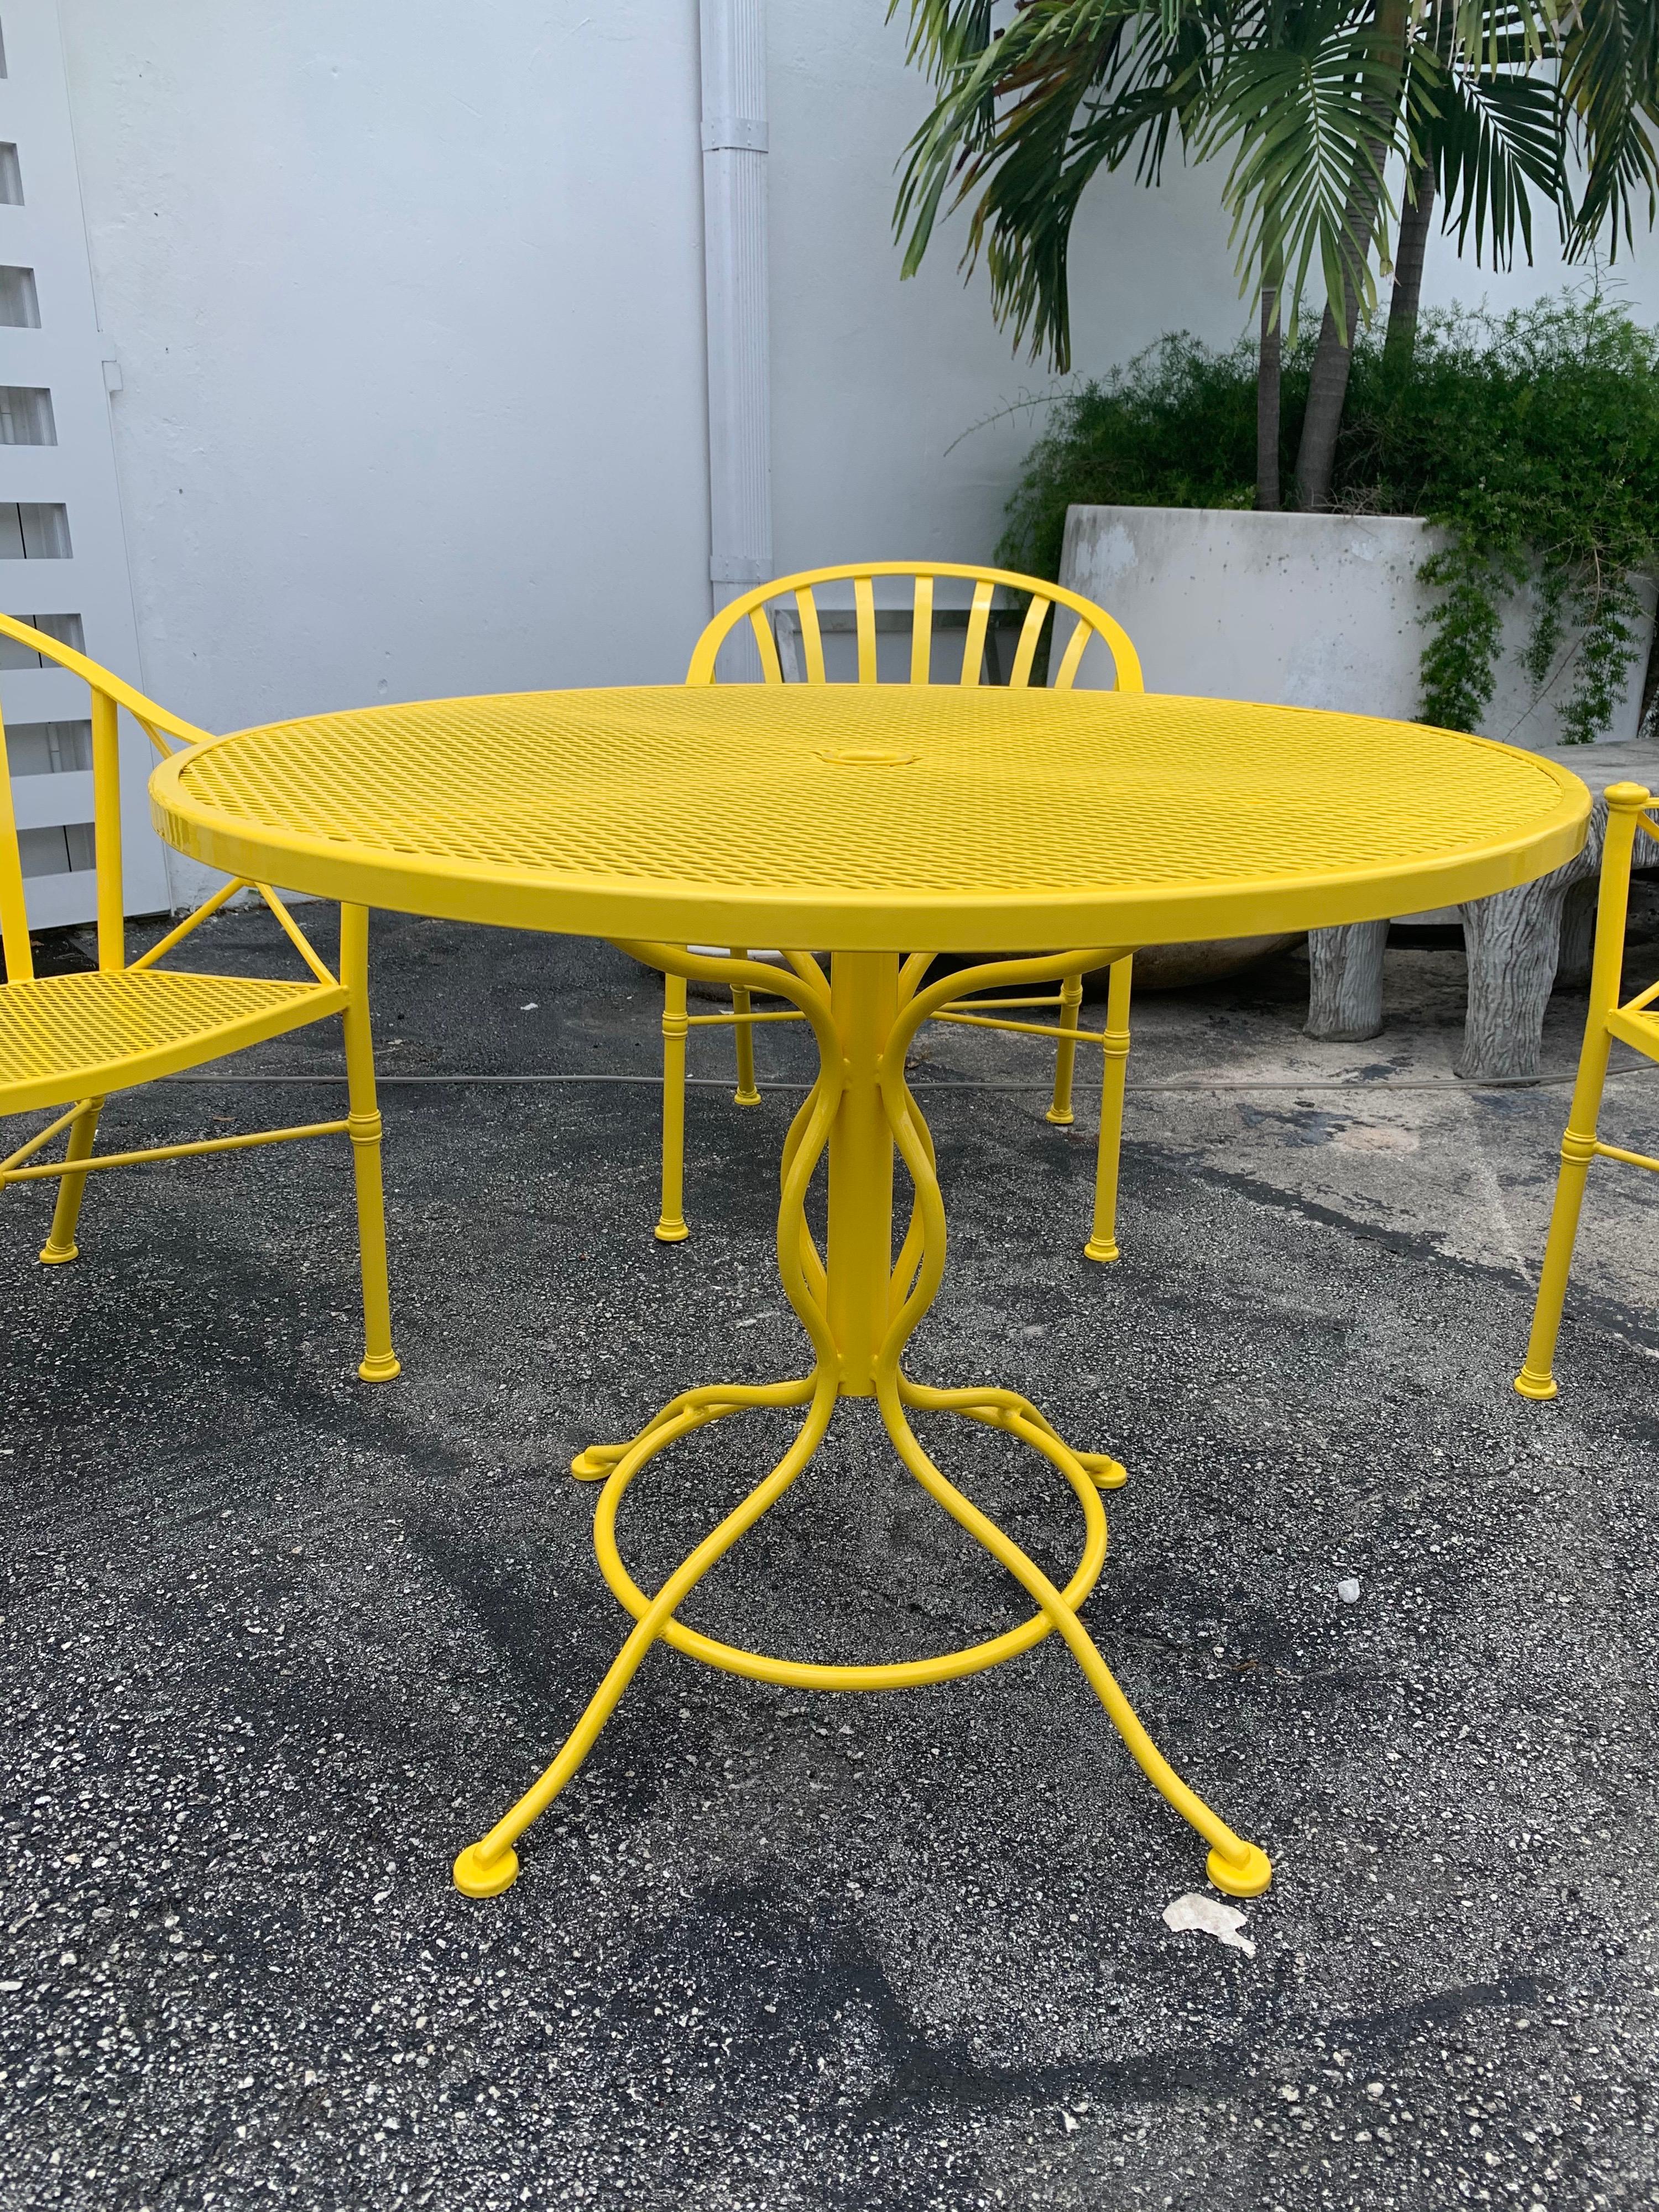 Table and three chairs in a powder coated vibrant canary yellow, heavy and great quality, ready for a Pop of brilliant color in your outdoor garden design.
Dining Table: 36.5 inches diameter, 28.5 inches tall
Chairs: 32.5 inches tall, 24.25 inches